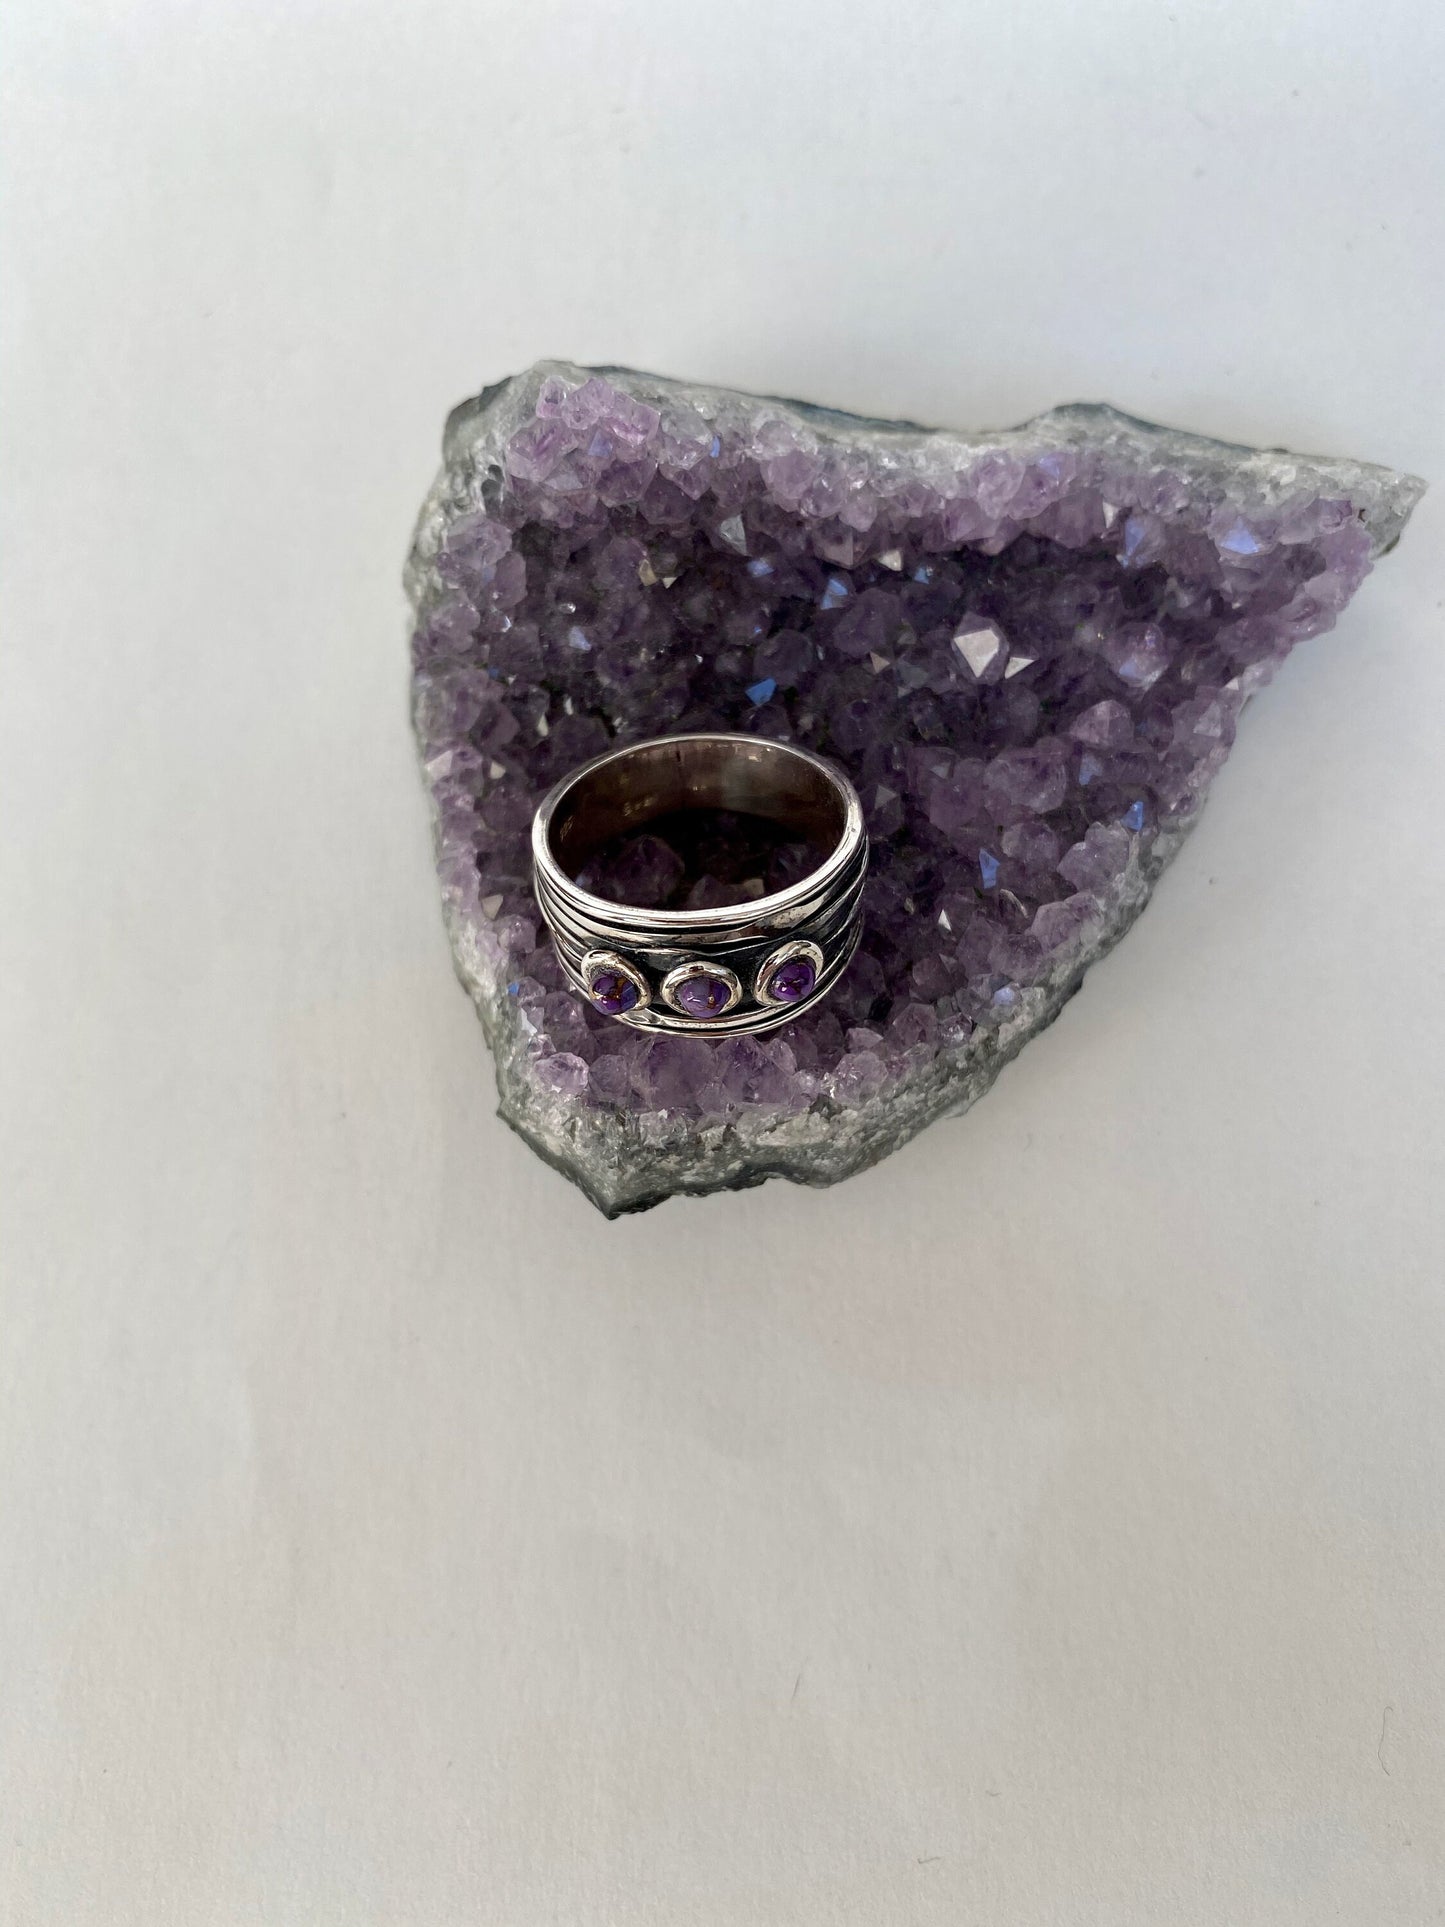 Handmade size 7.5 copper/purple 3 stone turquoise  and  sterling silver ring.